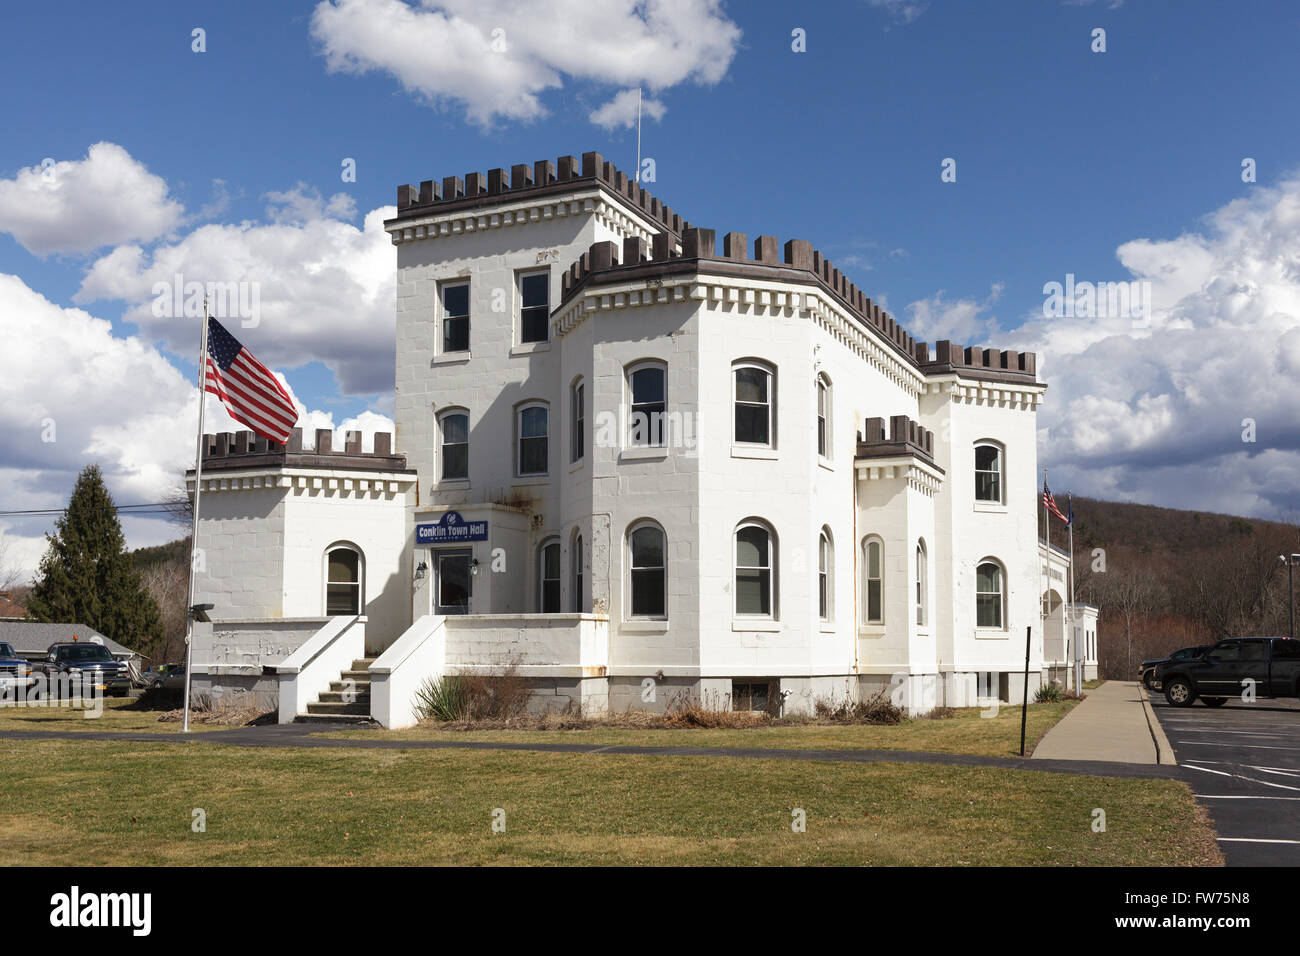 Town hall of Conklin, New York, has crenellated battlements. Southern Tier. USA. Stock Photo